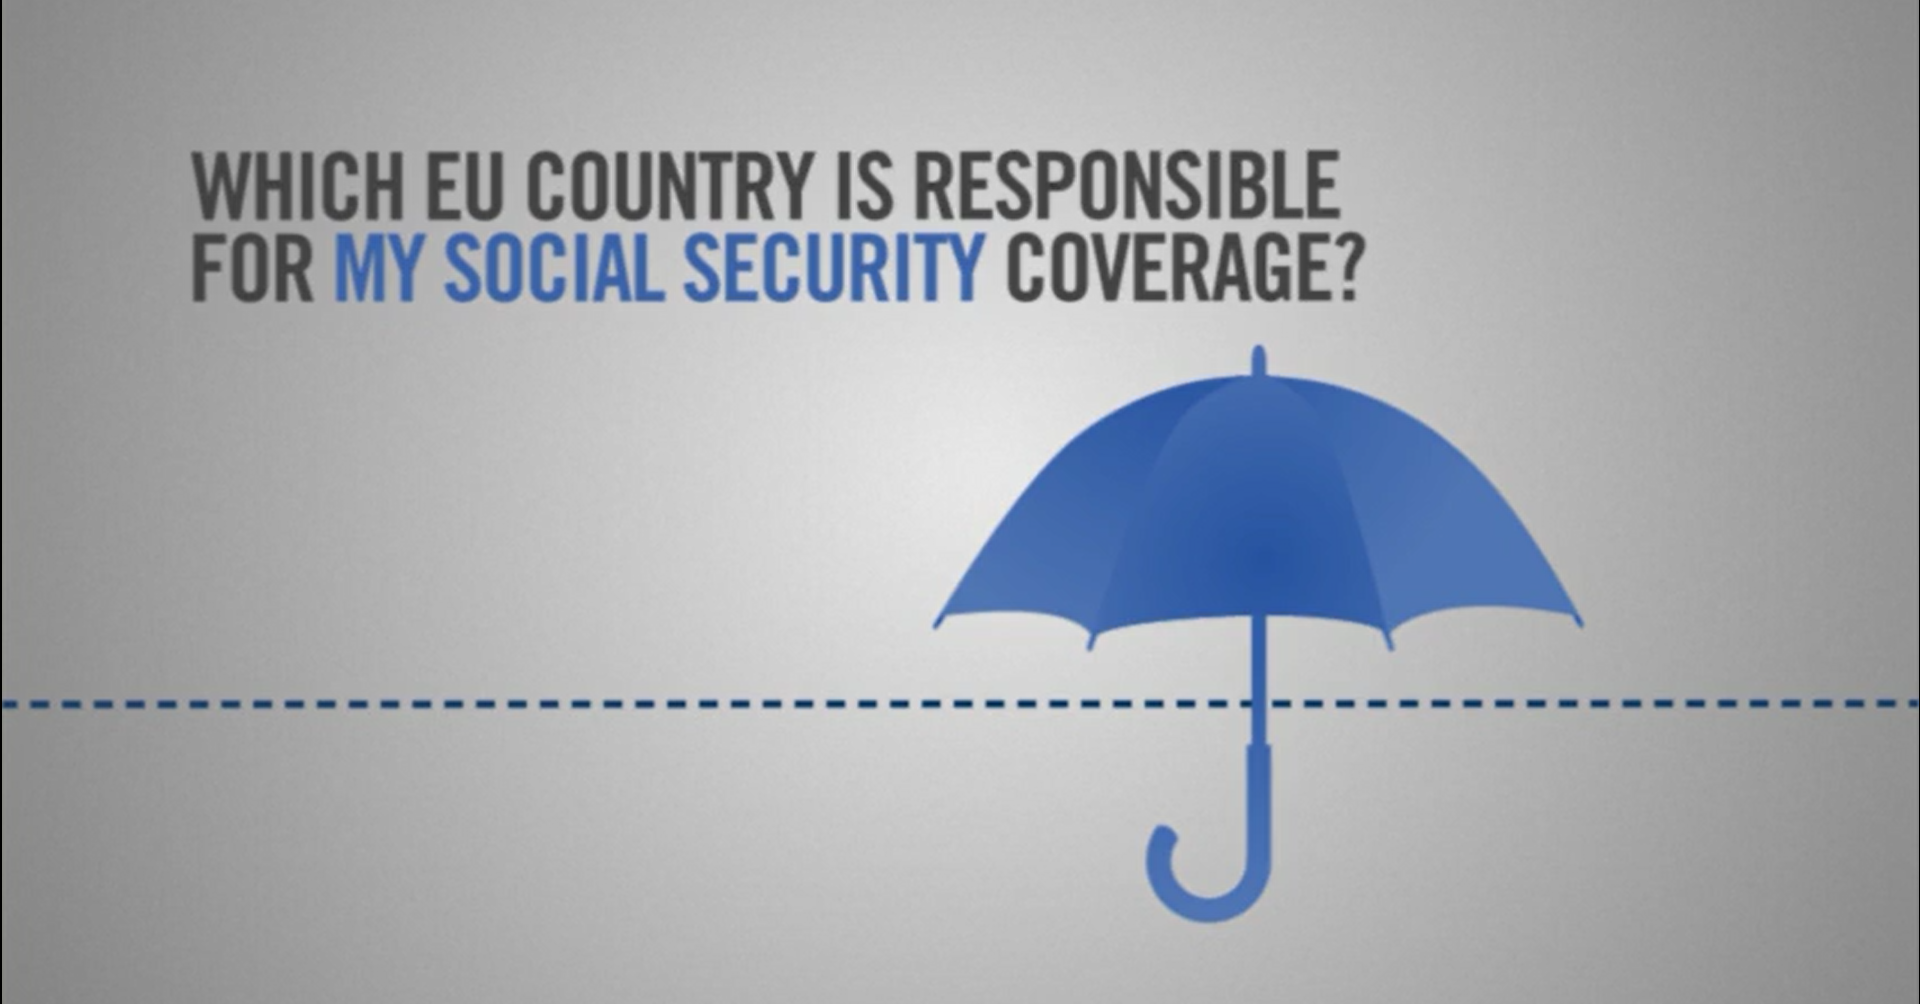 Which EU country is responsible for my social security coverage?